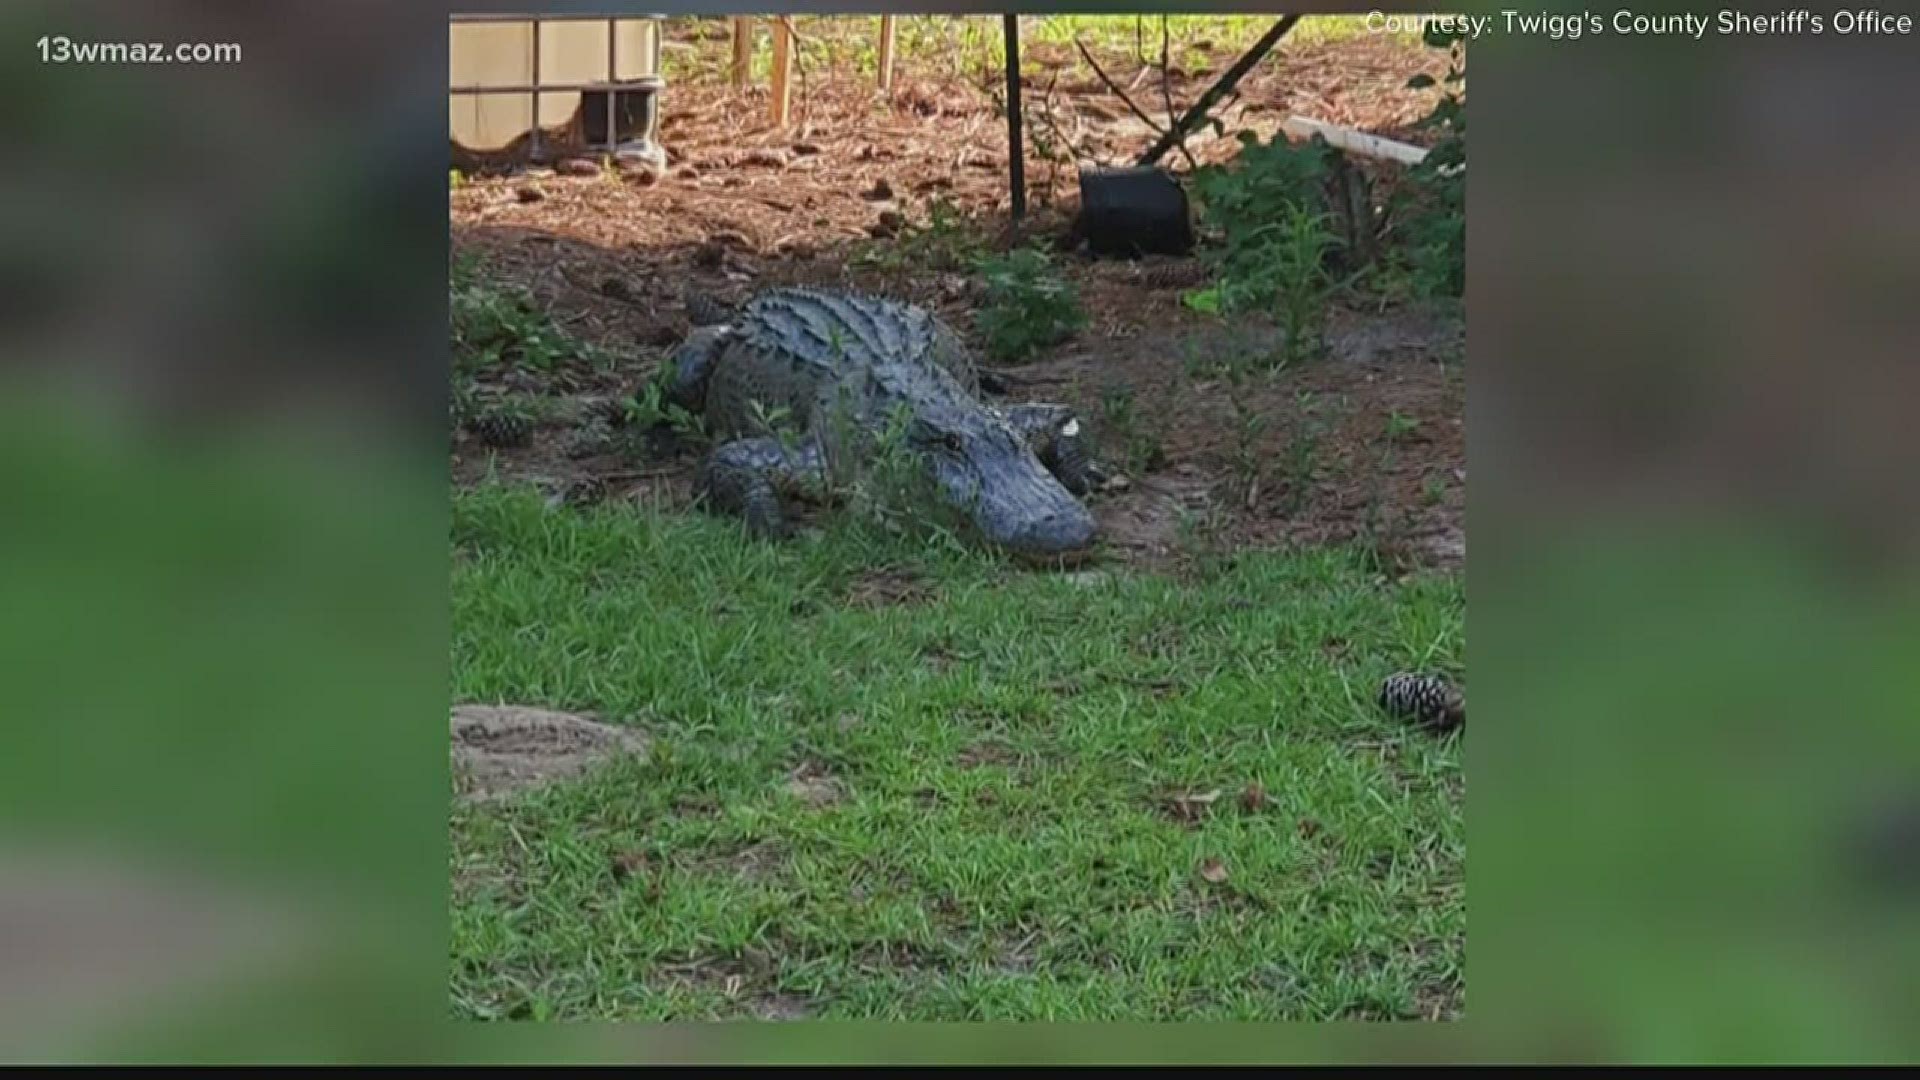 After a Twiggs County family found a nearly 10-foot alligator at their home, 13WMAZ is taking a look at what you can do to stay safe if you ever stumble upon a gator